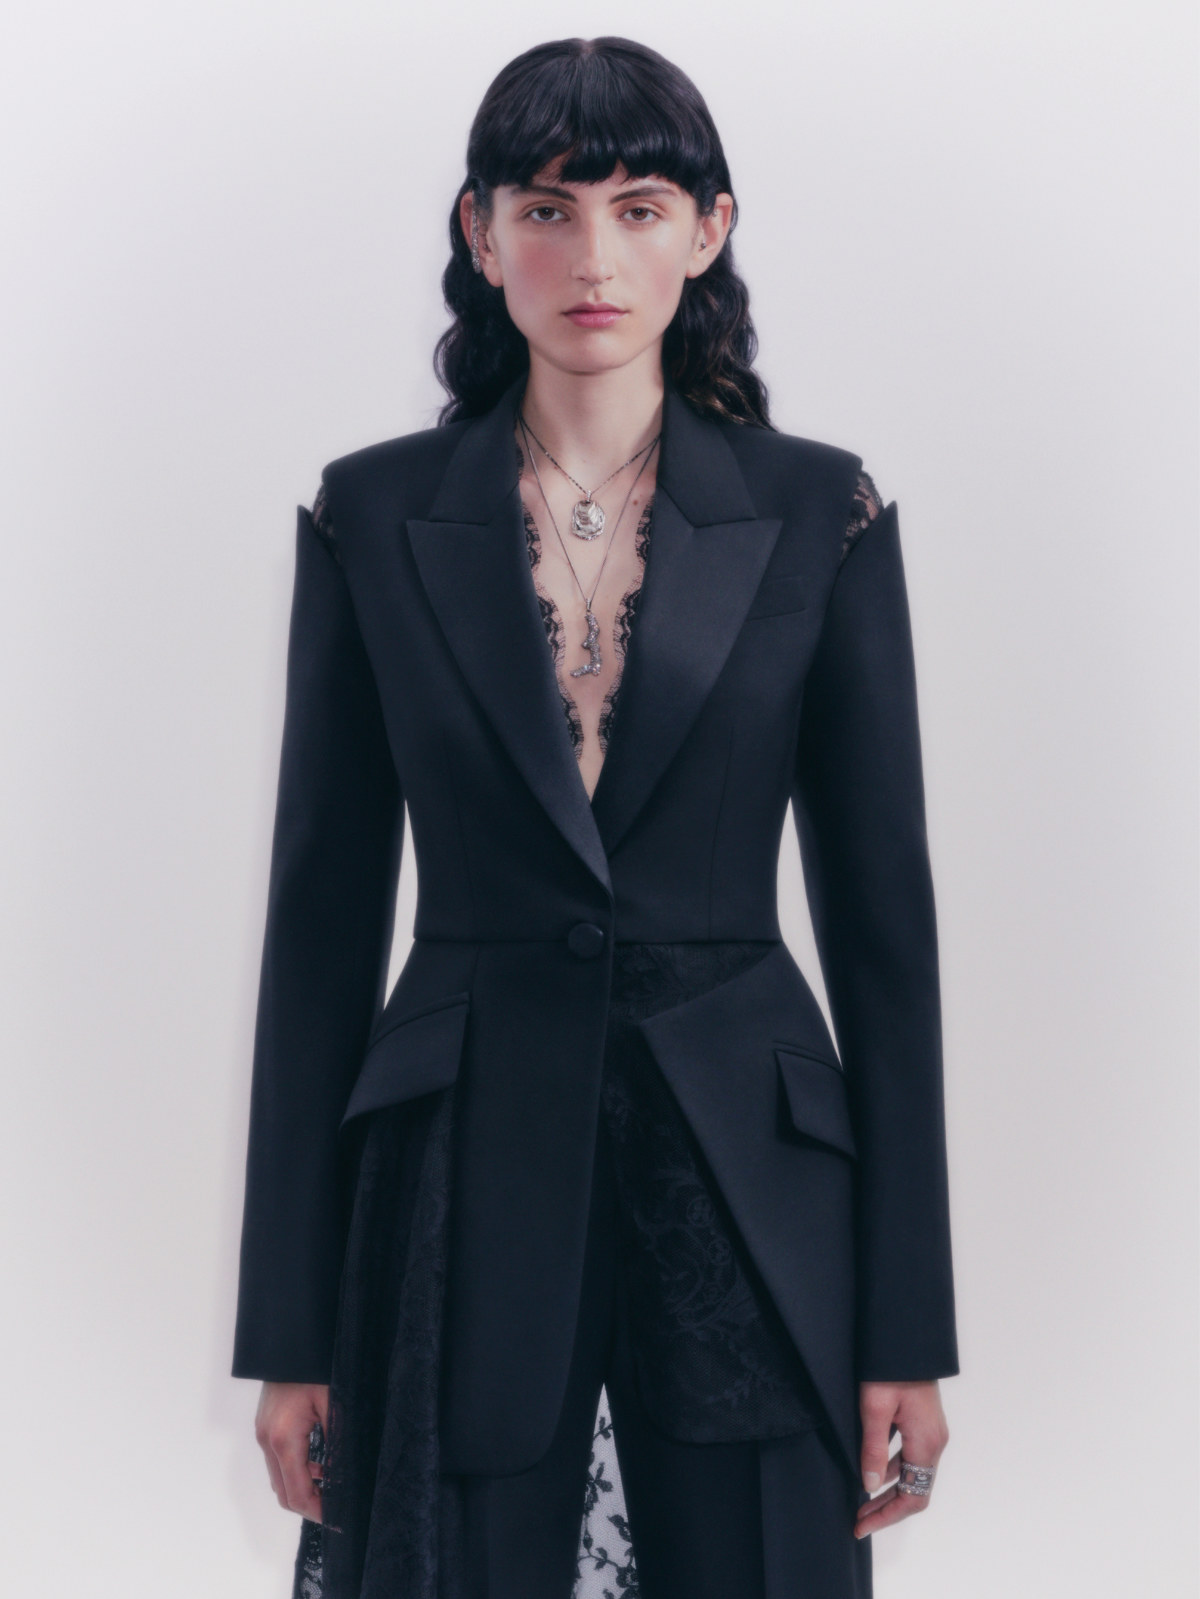 Alexander McQueen Presents Its New Pre-SS22 Womenswear Collection